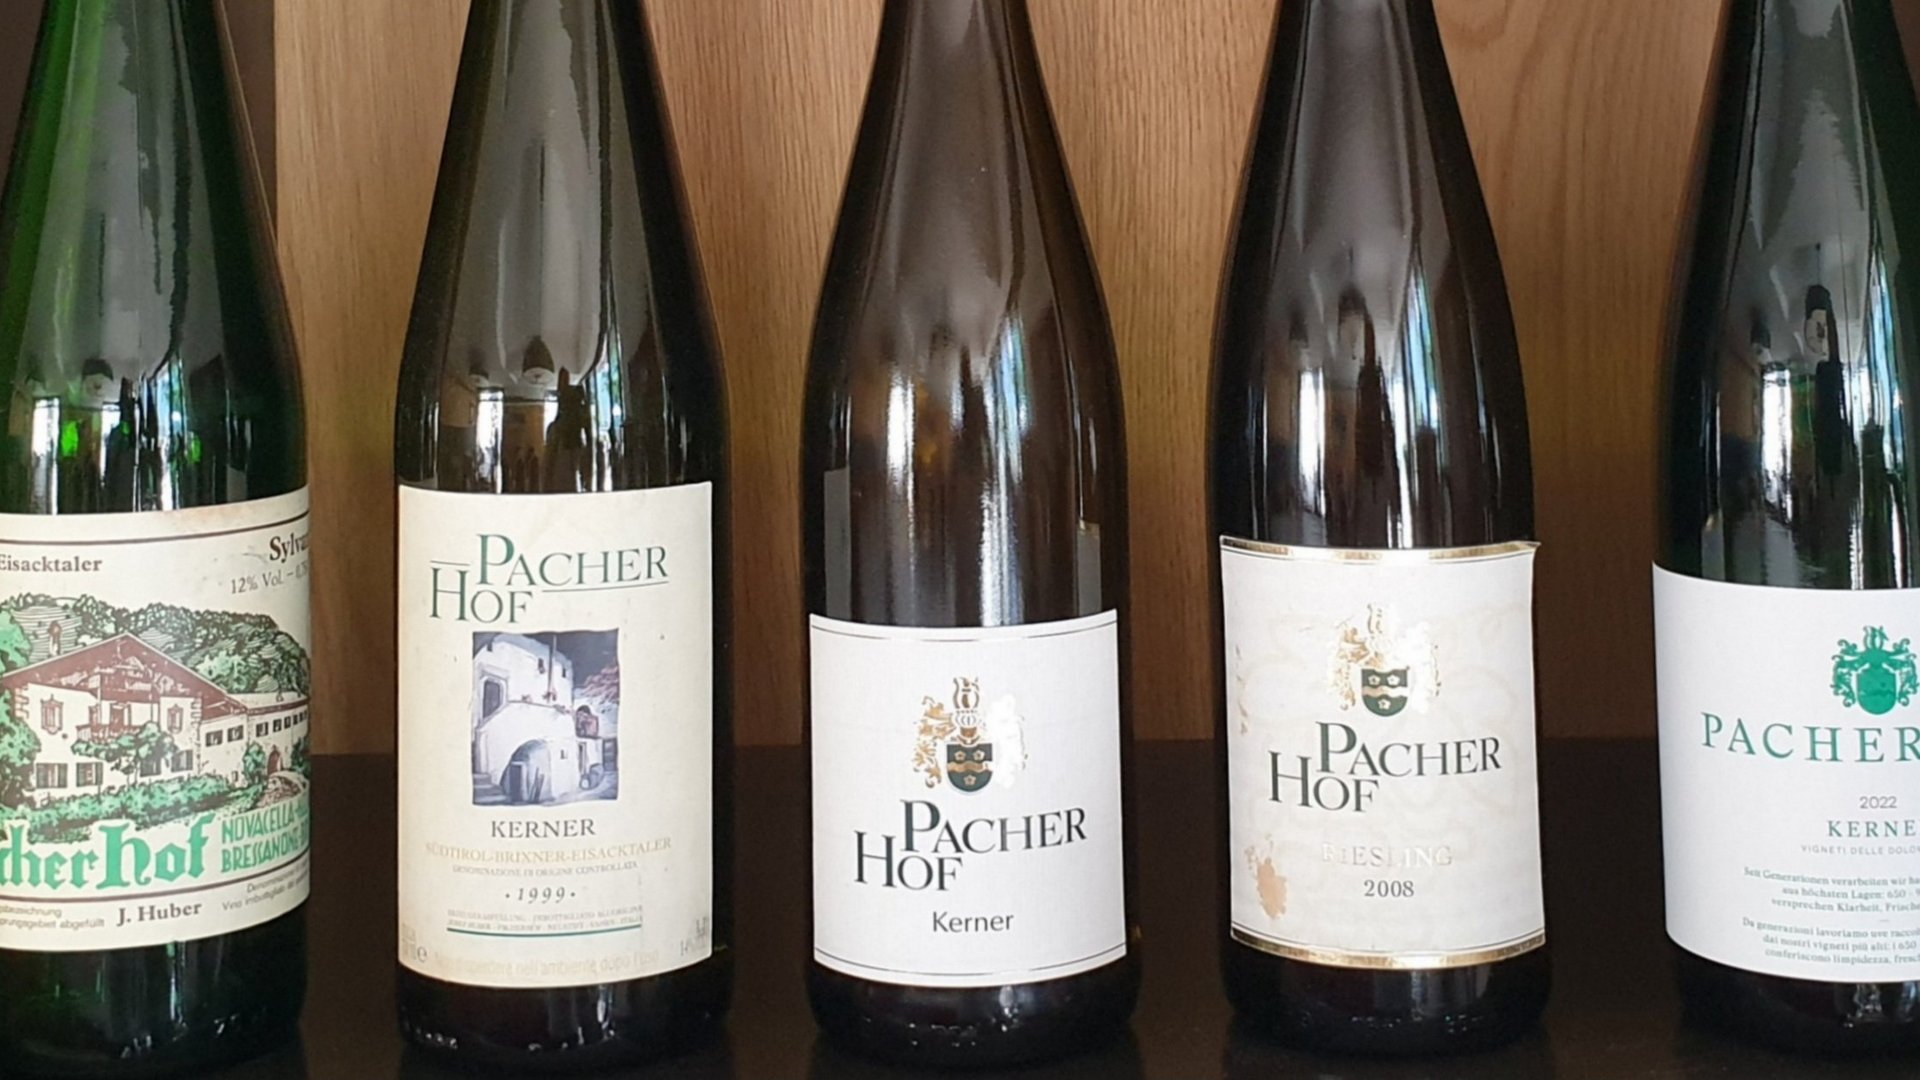 Fine wines from our wine cellar in South Tyrol